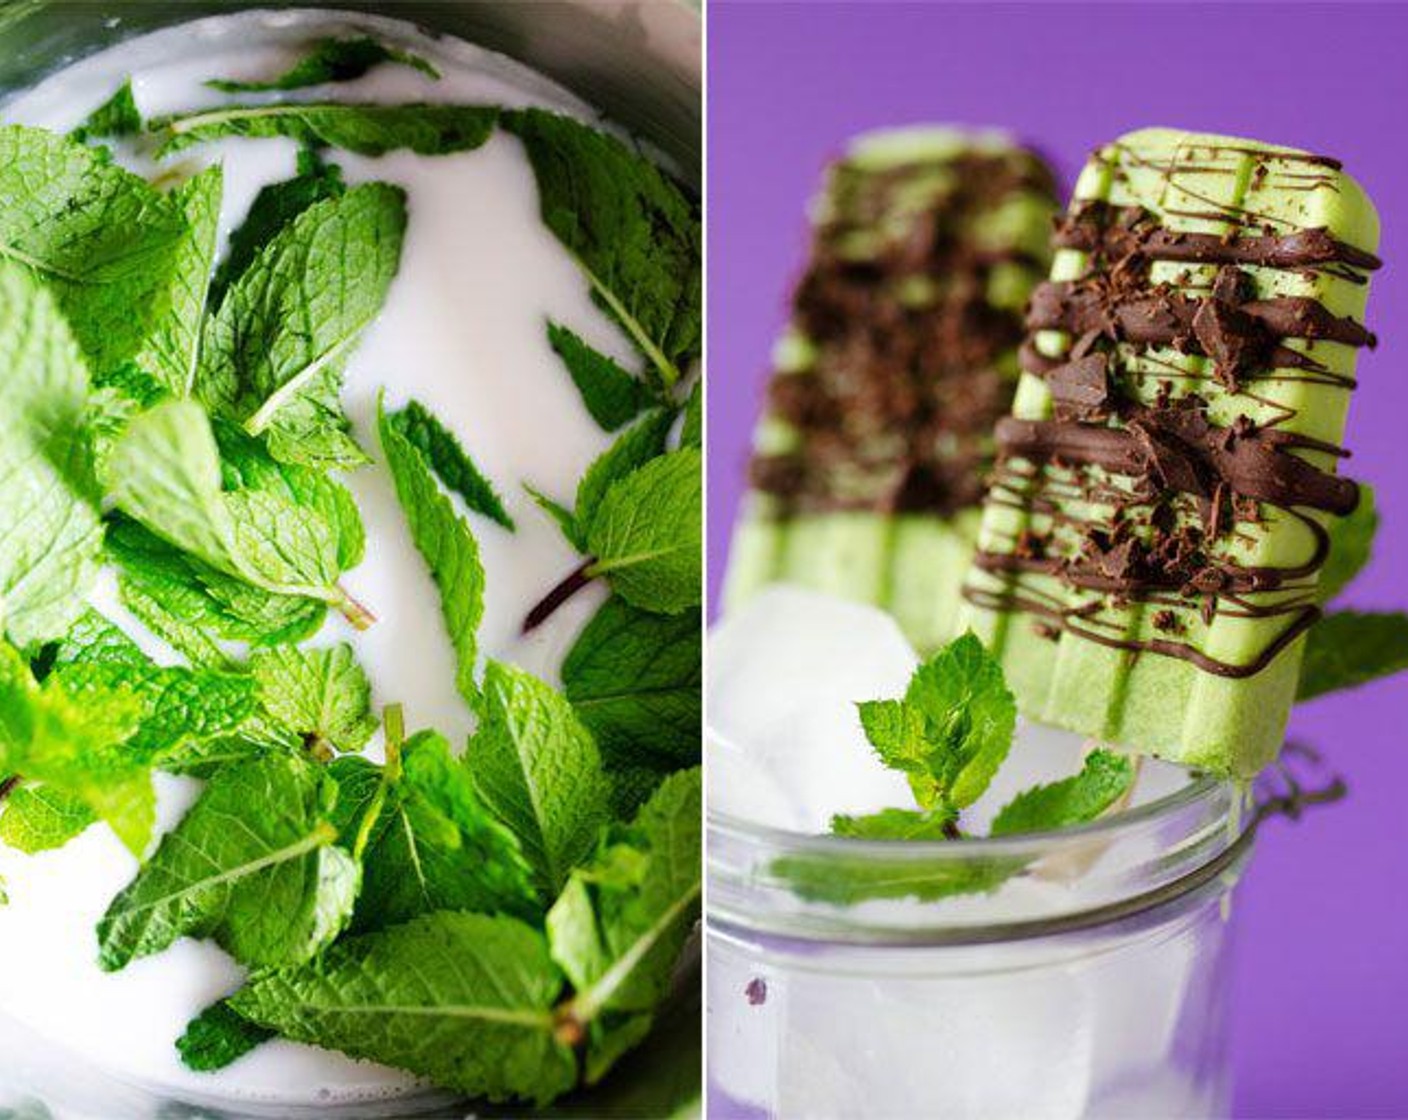 step 2 Remove from heat and add Fresh Mint Leaves (1 cup). Stir to combine and let mint leaves steep for 15 to 30 minutes. Strain mint leaves from the milk using a mesh sieve, discarding the mint leaves.